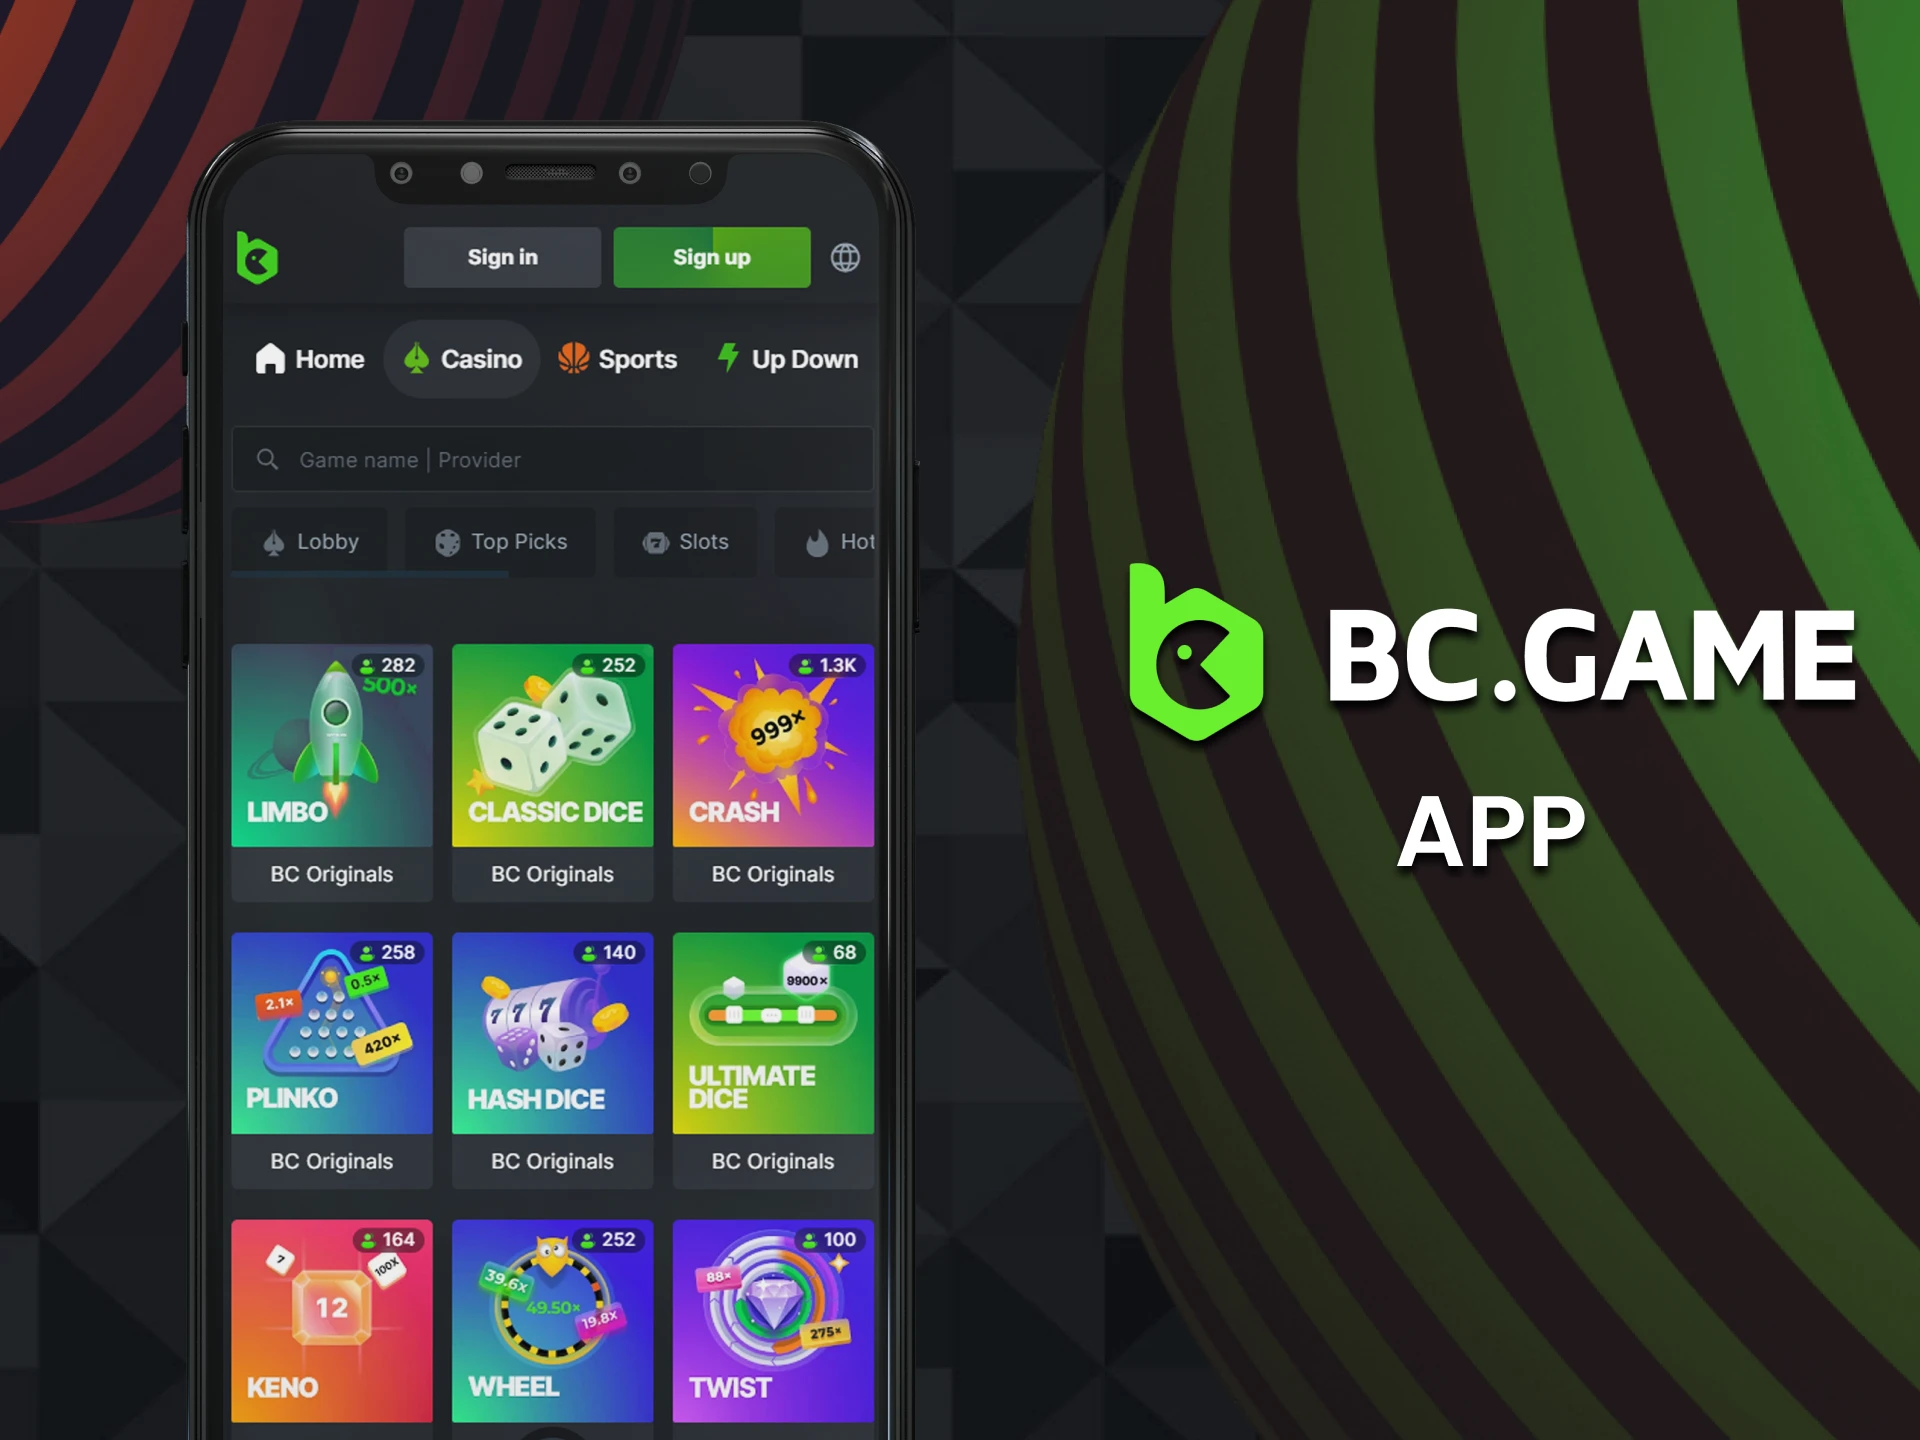 Use your smartphone to play Originals on BC Game via app for Android and iOS.